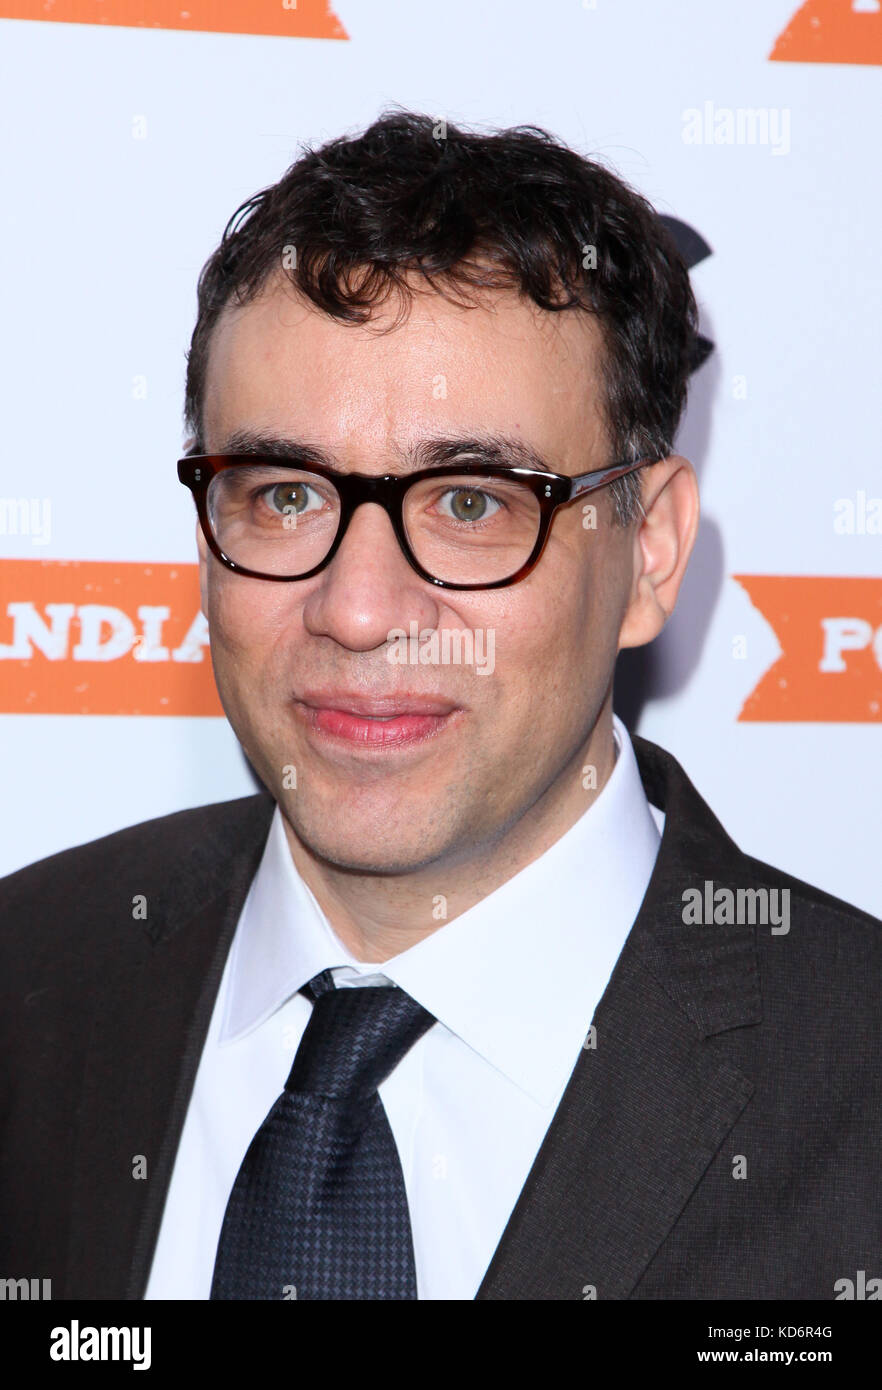 Fred Armisen pictured at the premiere of IFCs' comedy series ' Portlandia ' at The Edison Ballroom in New York City, January 19, 2011 © Martin Roe / MediaPunch Inc Stock Photo